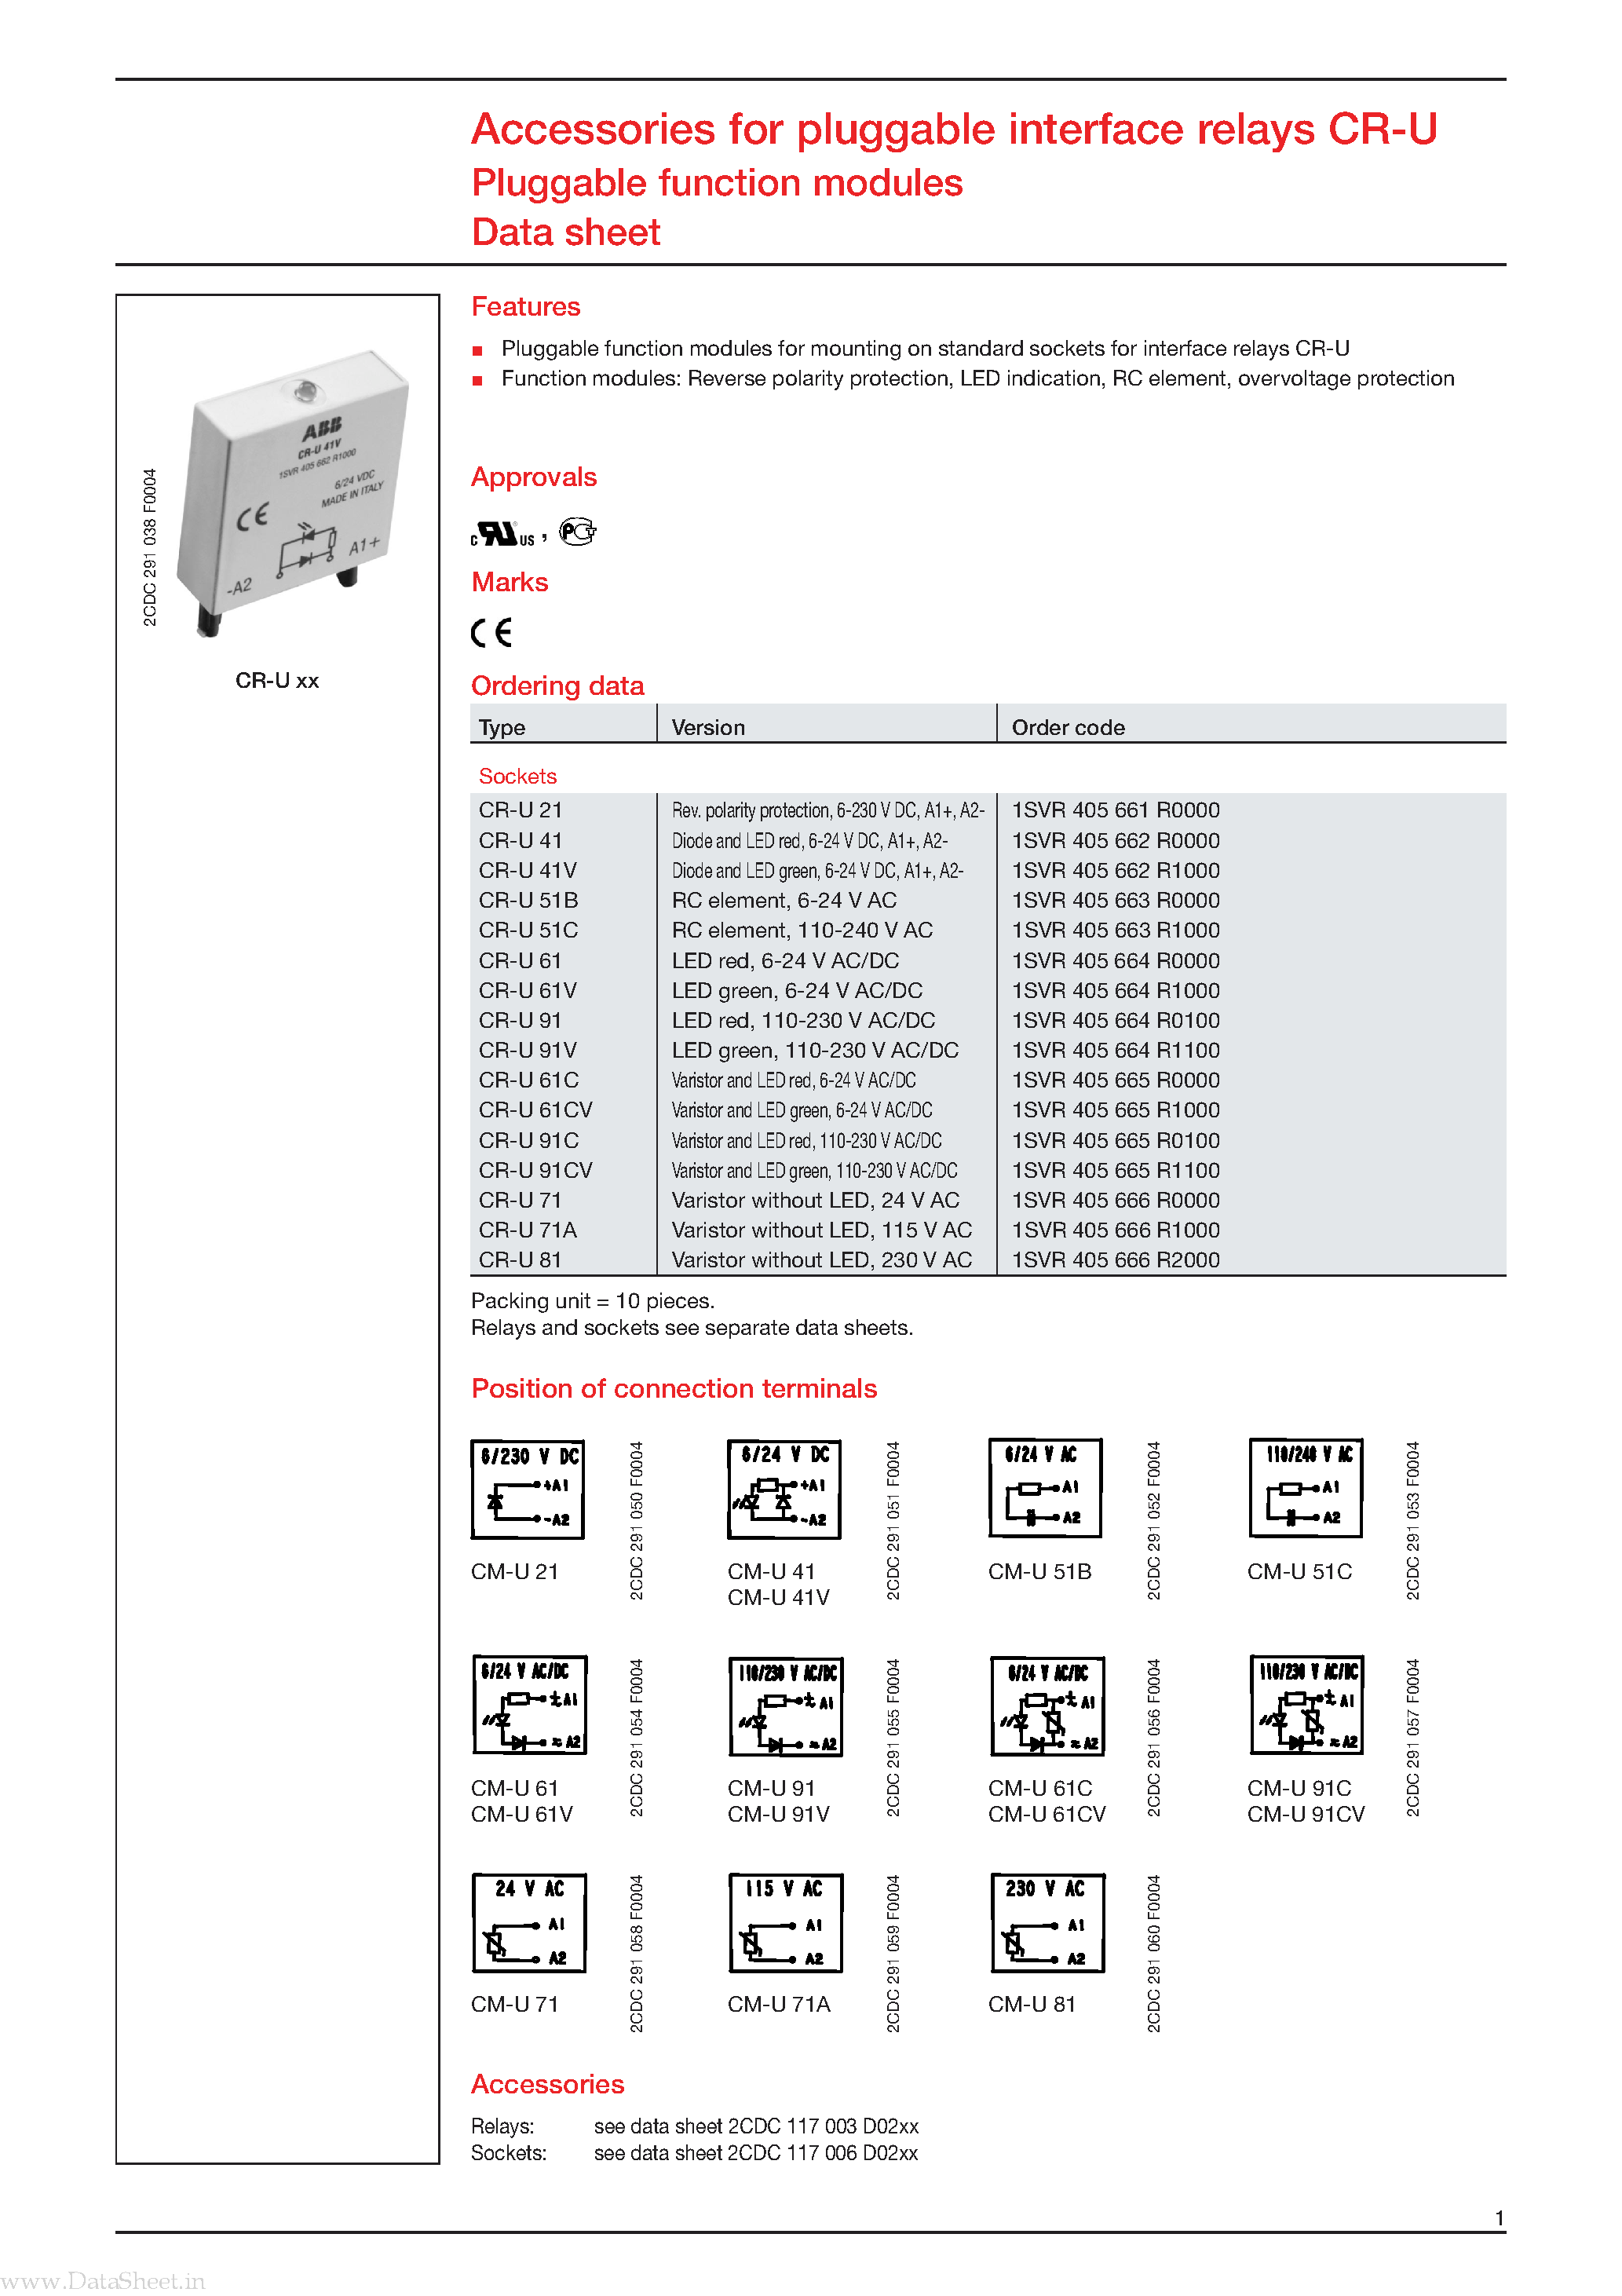 Datasheet 1SVR405661R0000 - Accessories for pluggable interface relays CR-U Pluggable function modules page 1